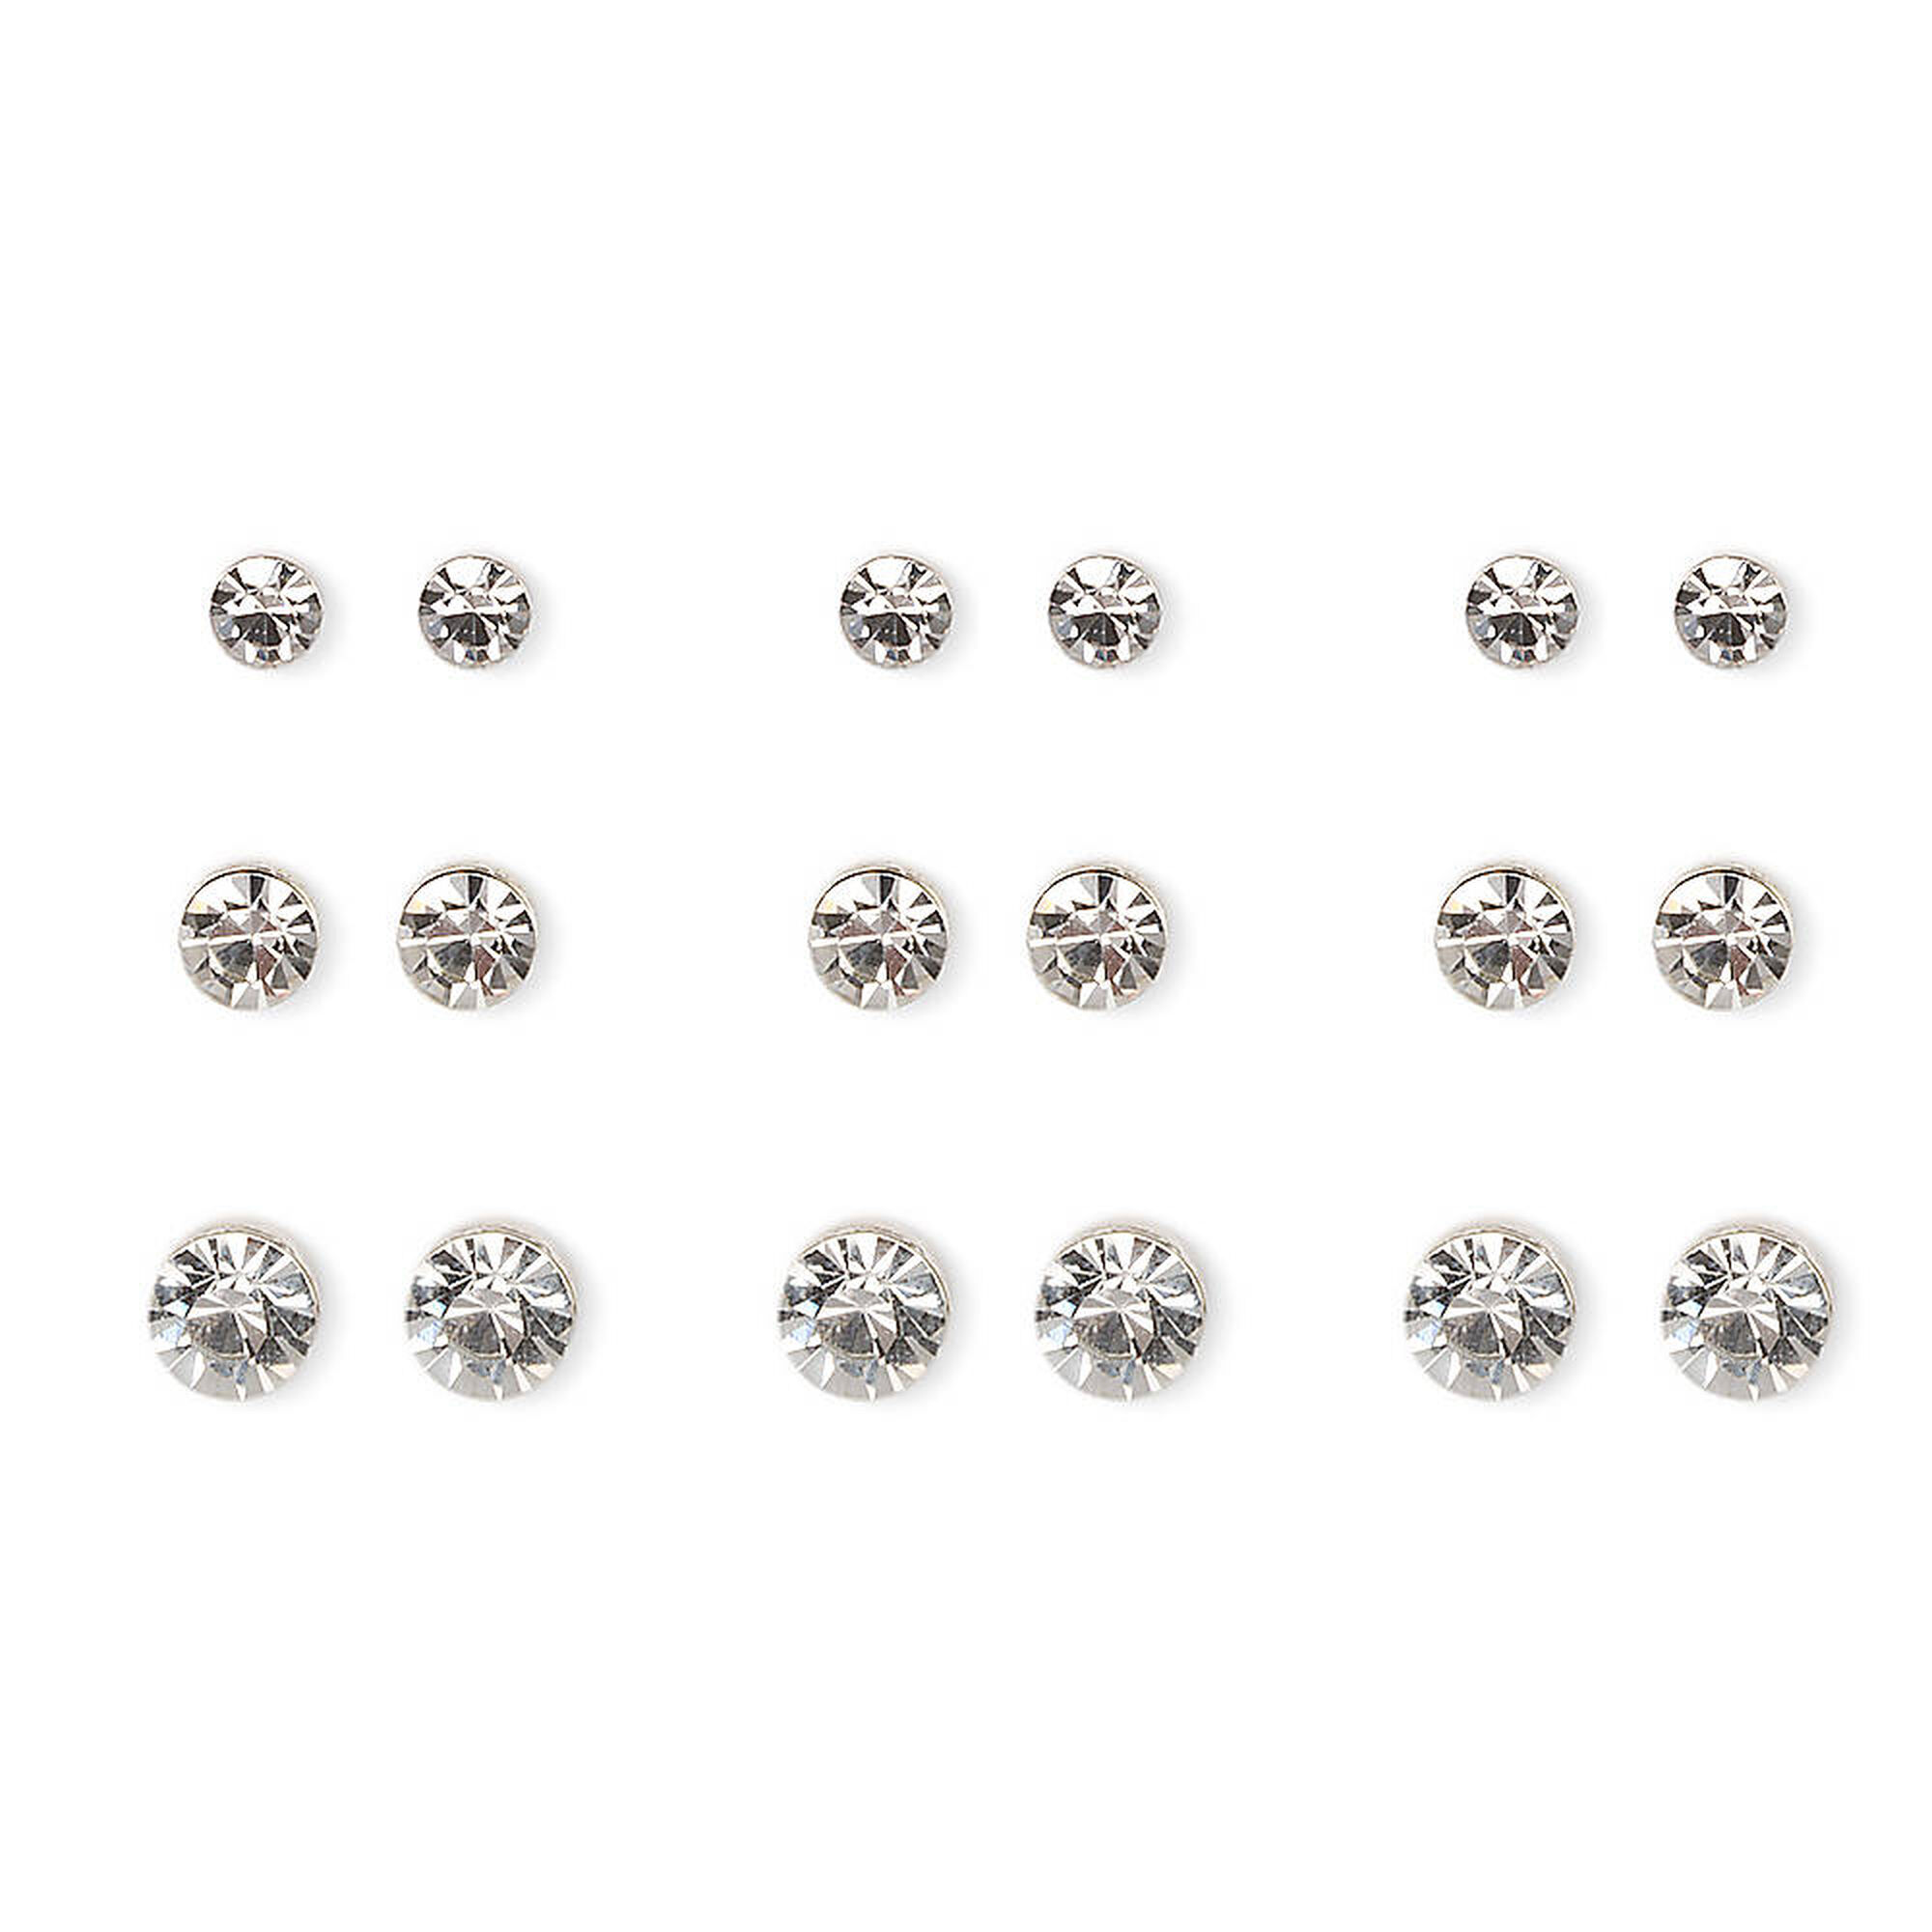 View Claires Tone Graduated Crystal Bezel Stud Earrings 9 Pack Silver information